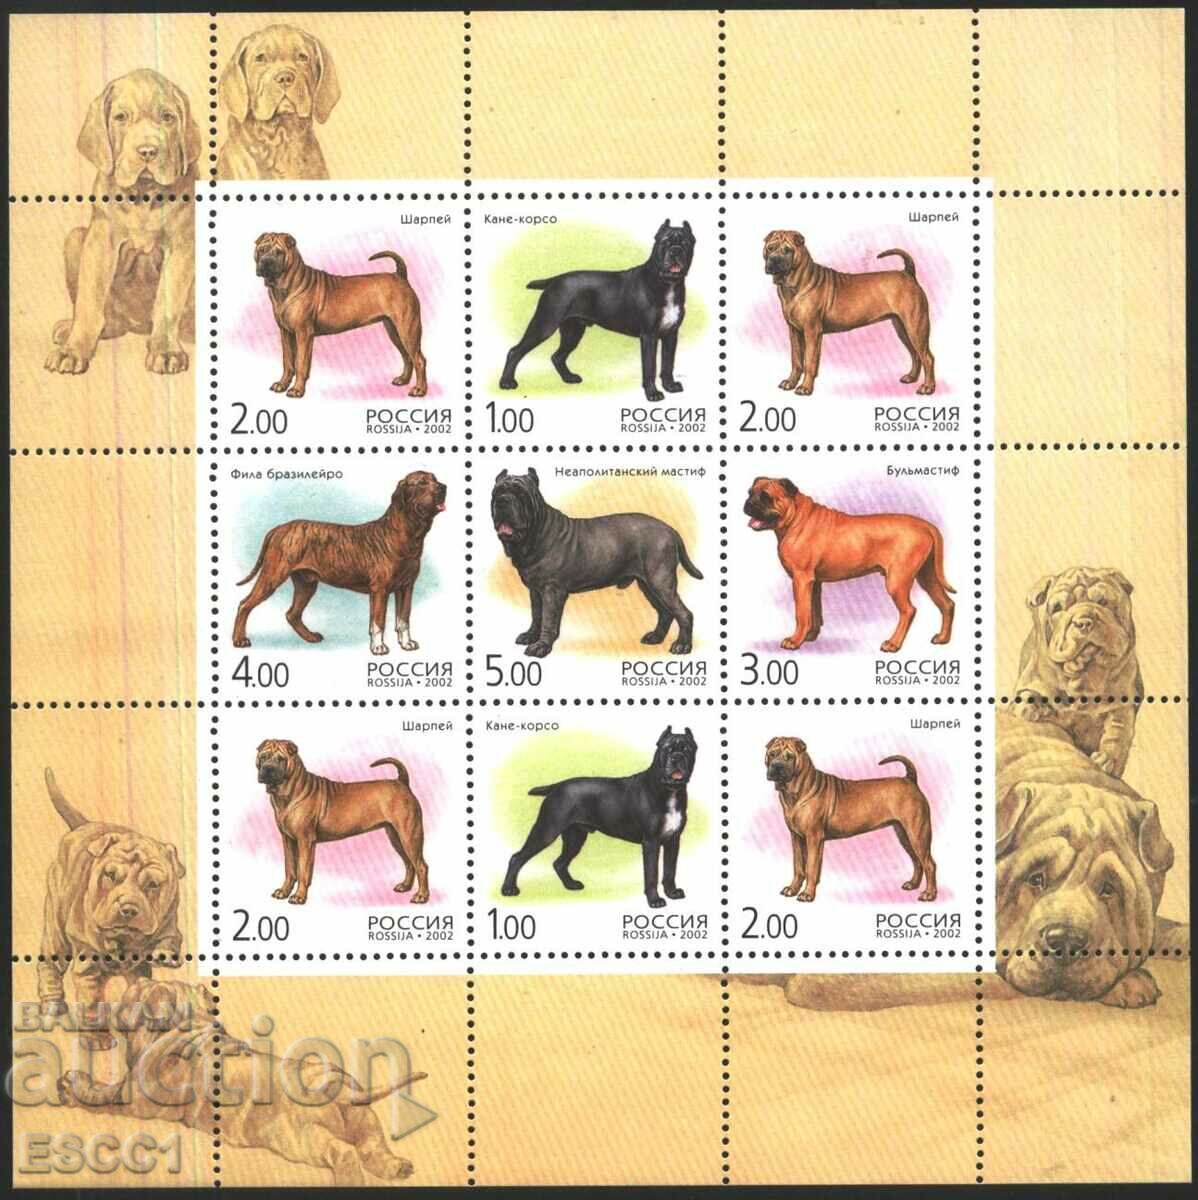 Clean stamps in small sheet Fauna Dogs 2002 from Russia